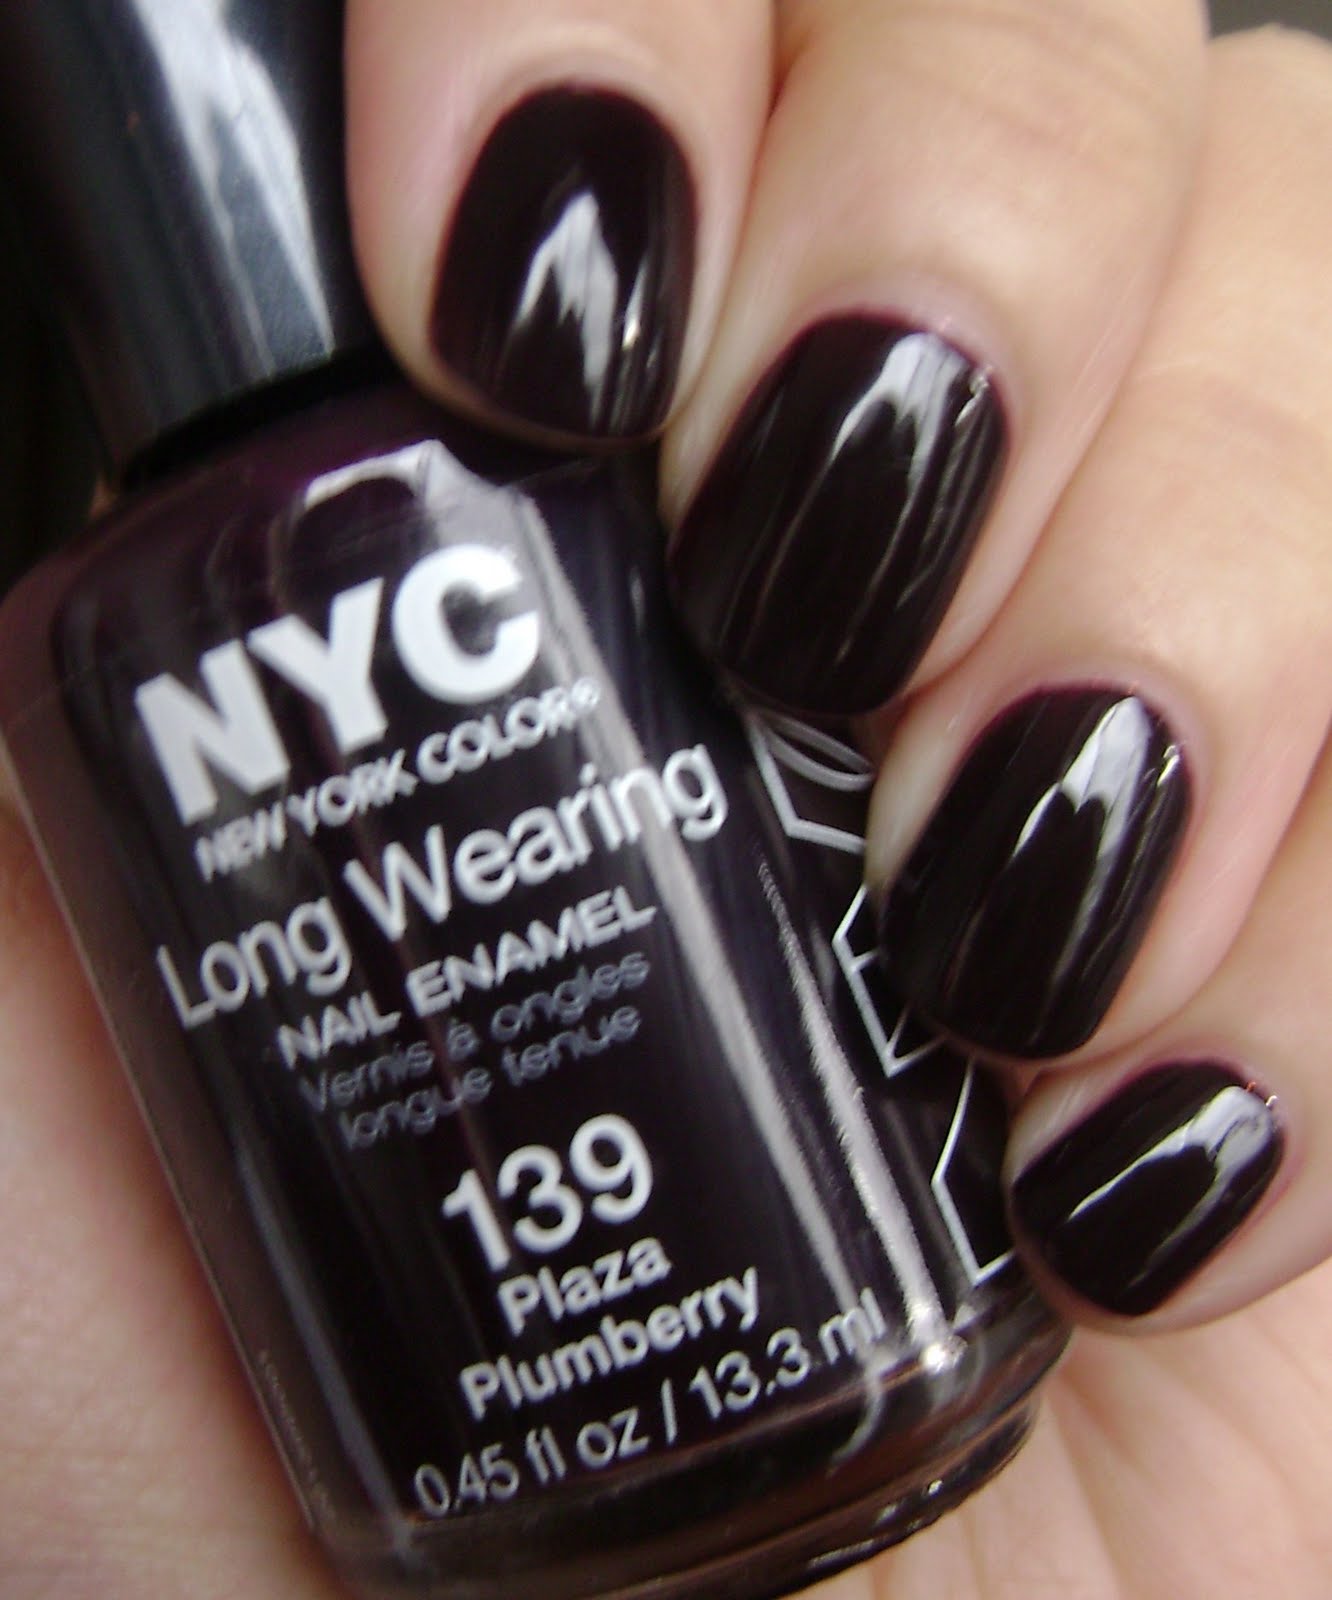 I like this shade -- looks black, but just barely plum-tinged